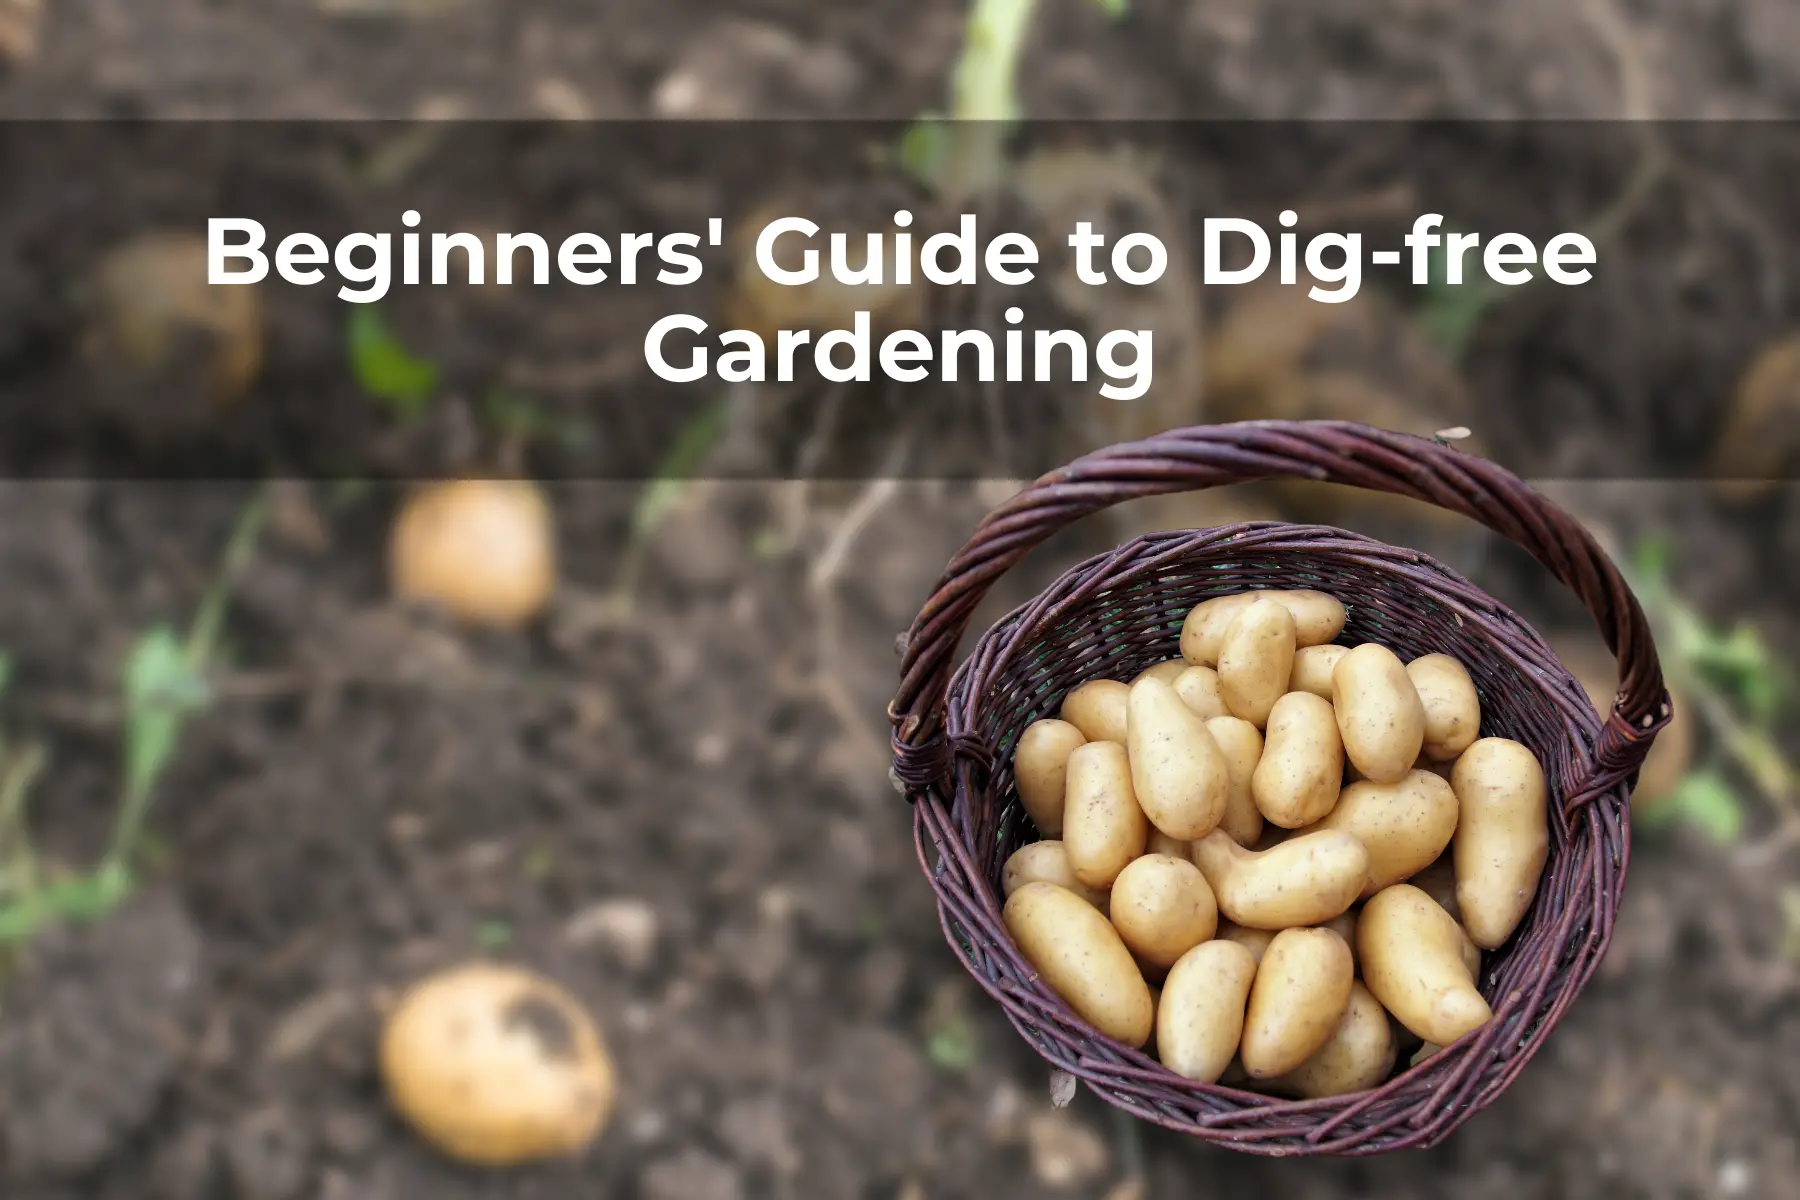 Beginners' Guide to Dig free Gardening